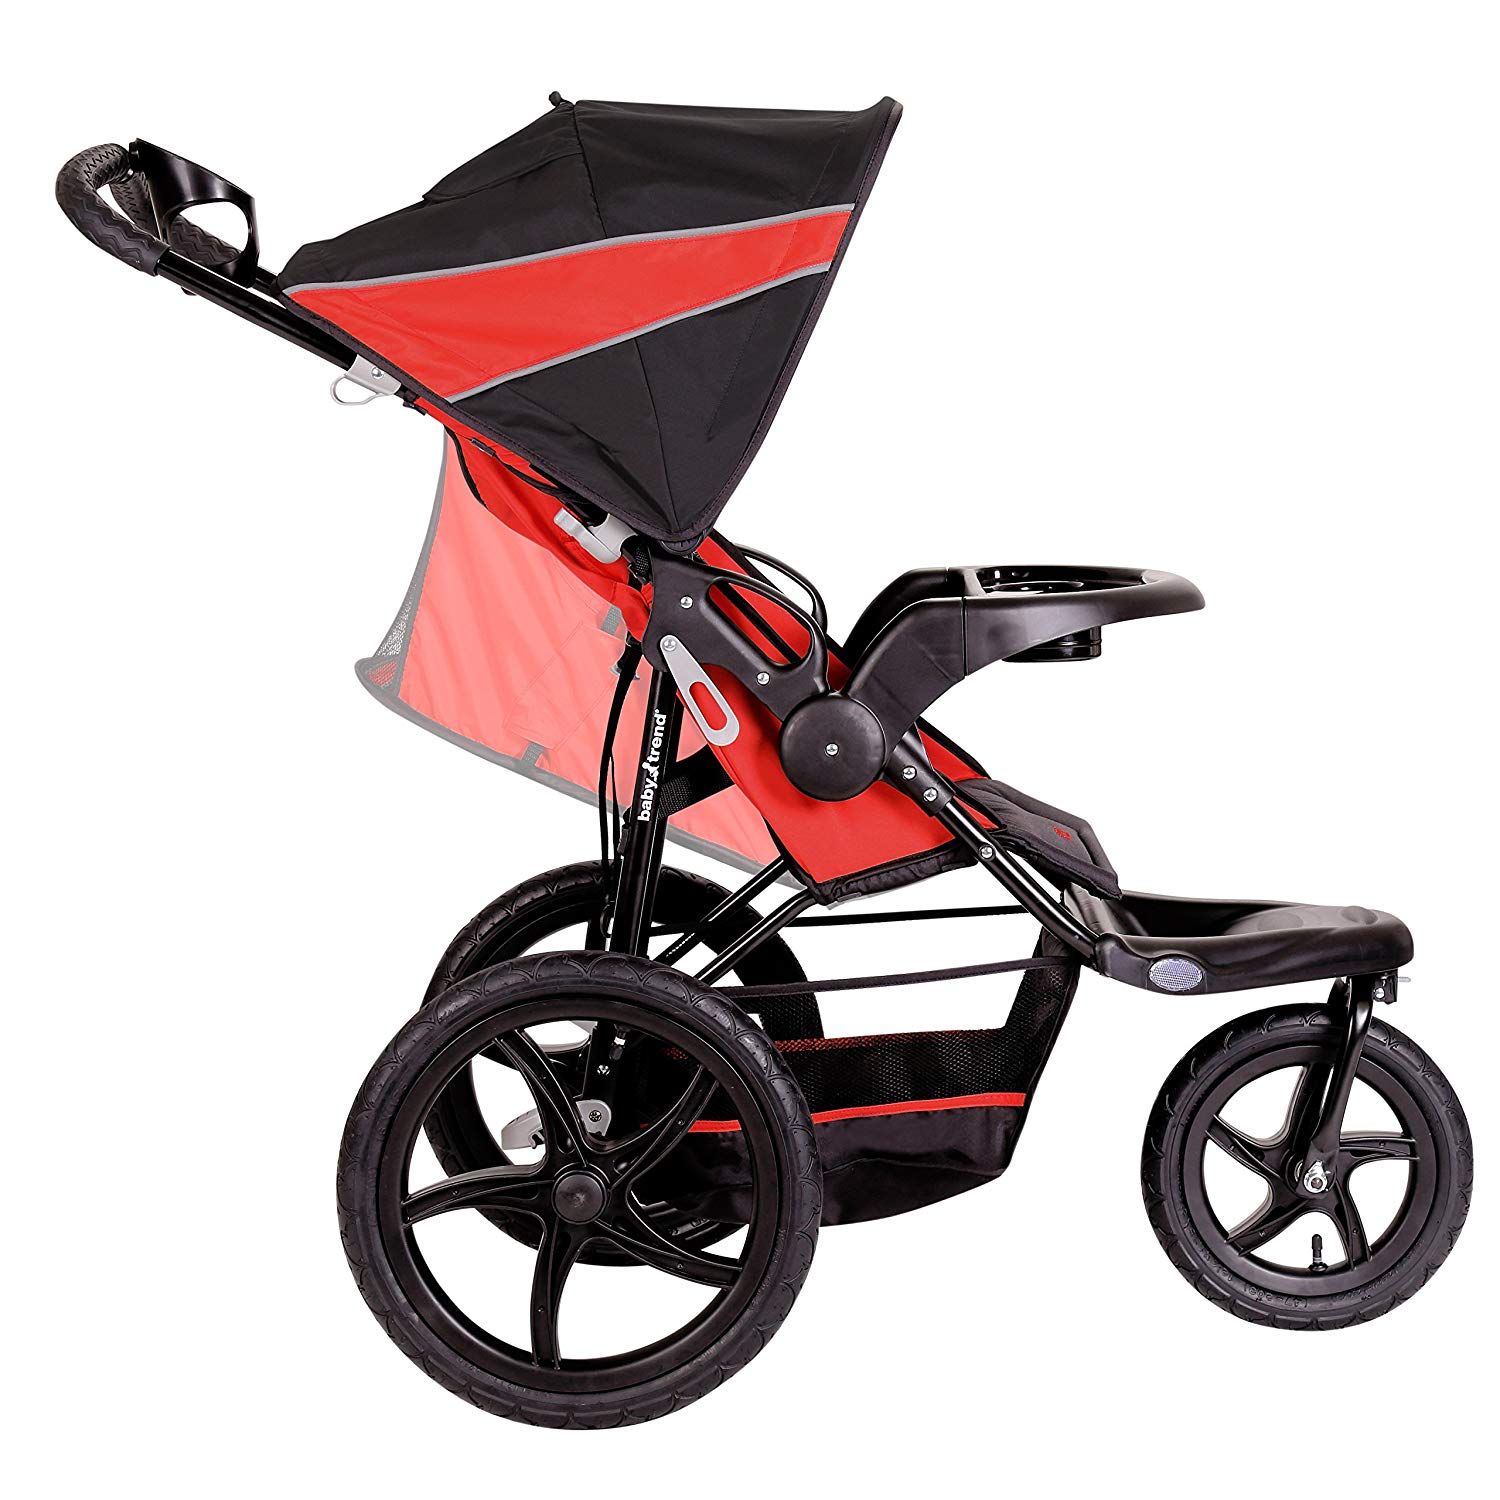 Baby Trend XCEL Infant/Child All Terrain Fitness Travel Jogger Stroller, Picante - image 3 of 6